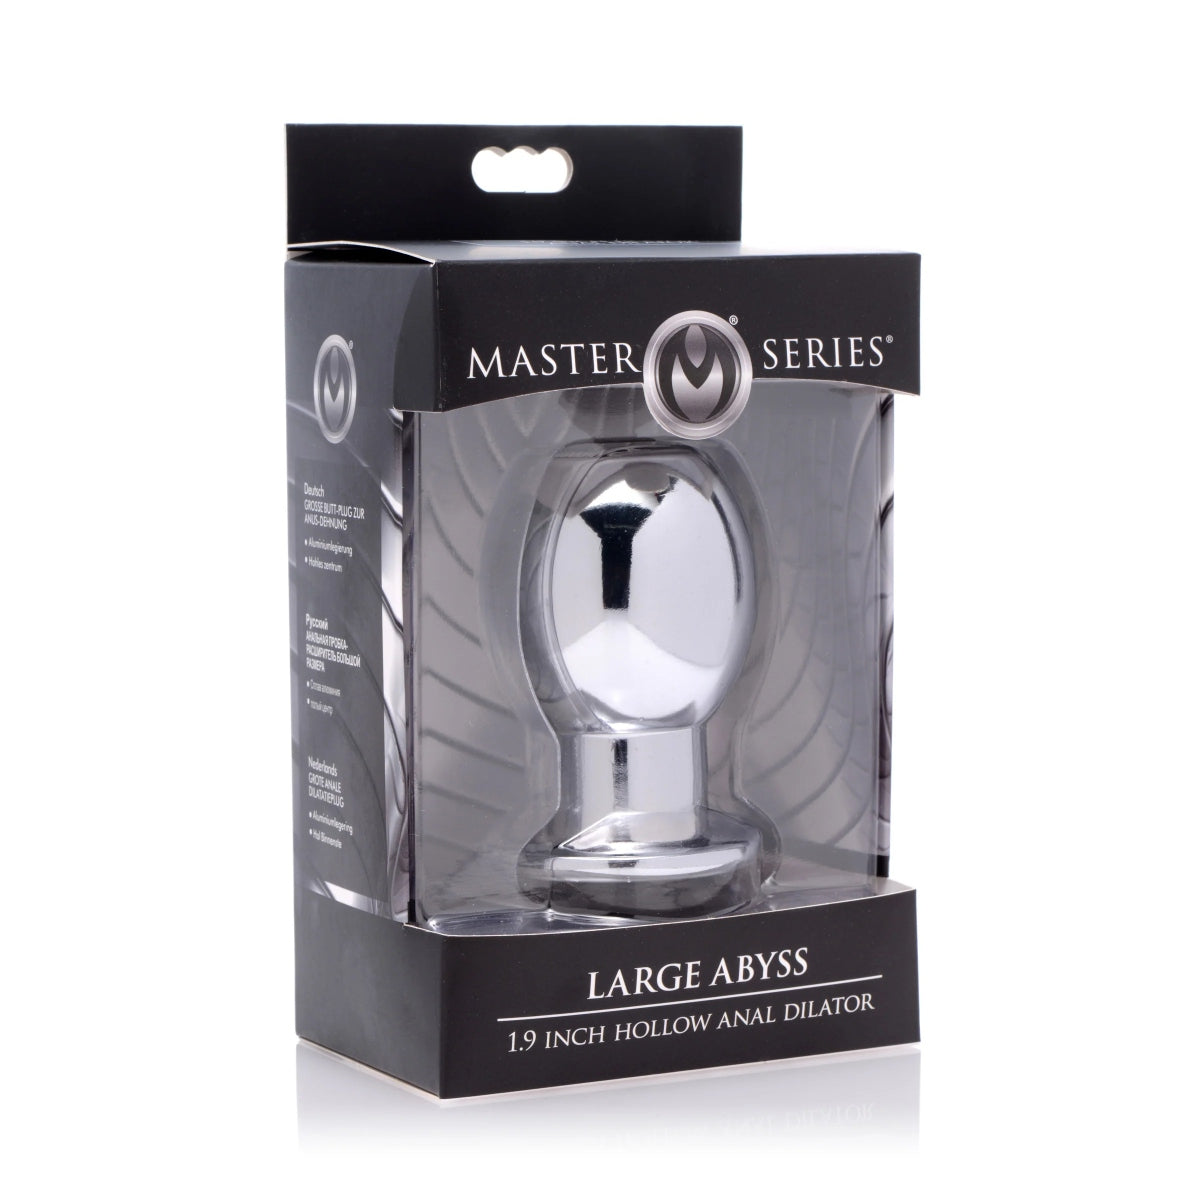 Master Series Large Abyss Hollow Anal Dilator Silver 1.9 Inch